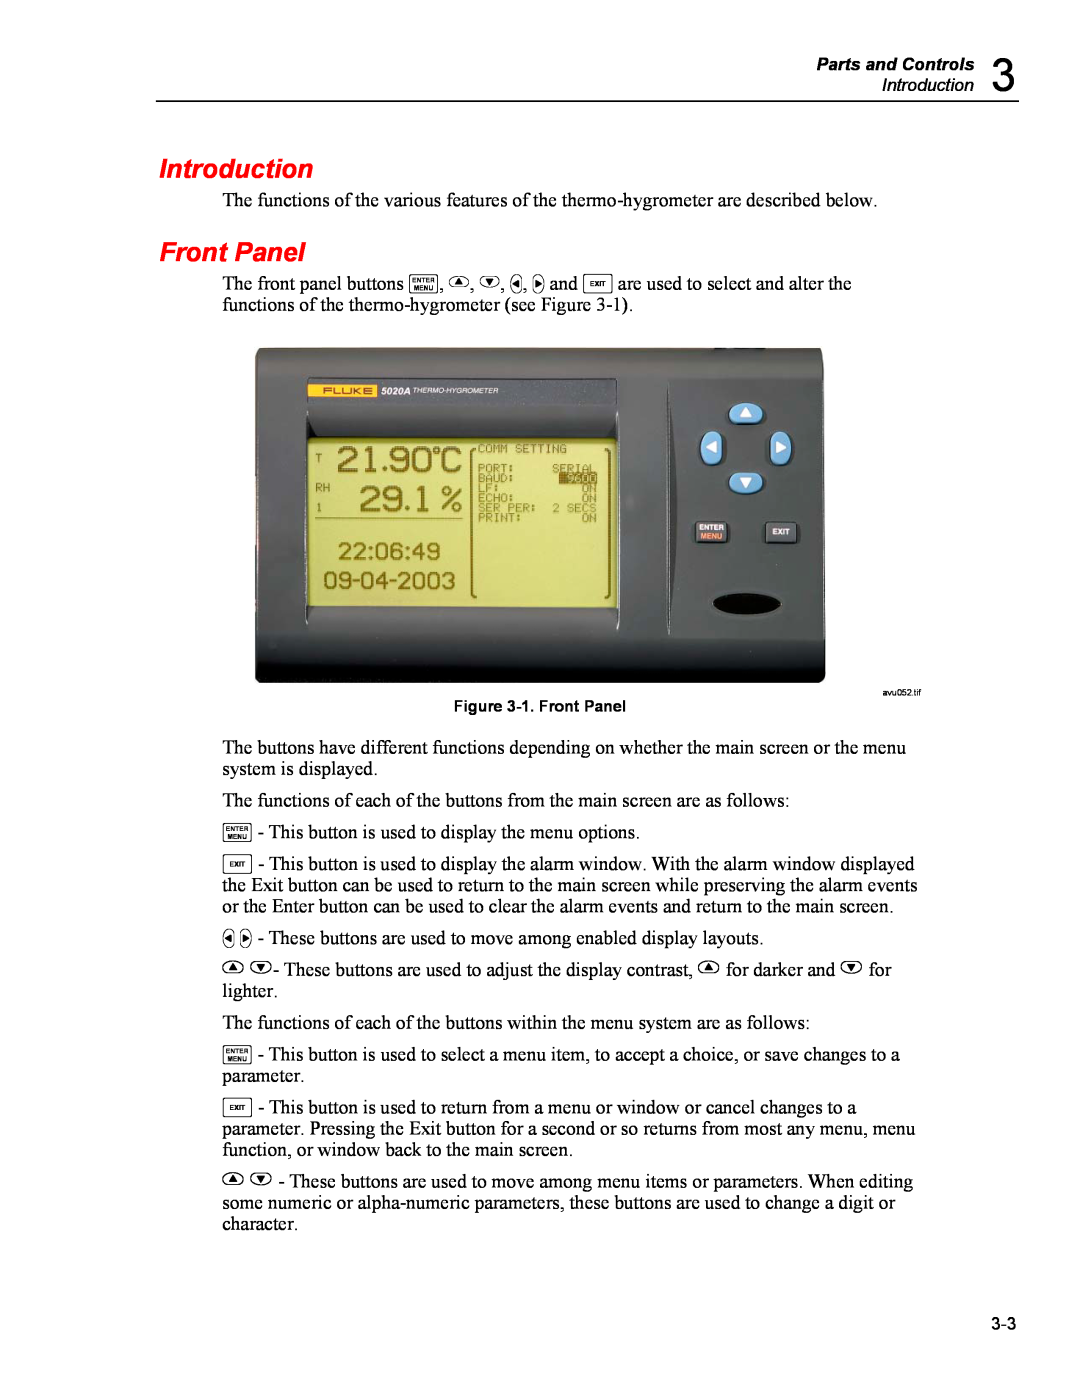 Fluke 5020A user manual Front Panel, Introduction, B C - These buttons are used to move among enabled display layouts 